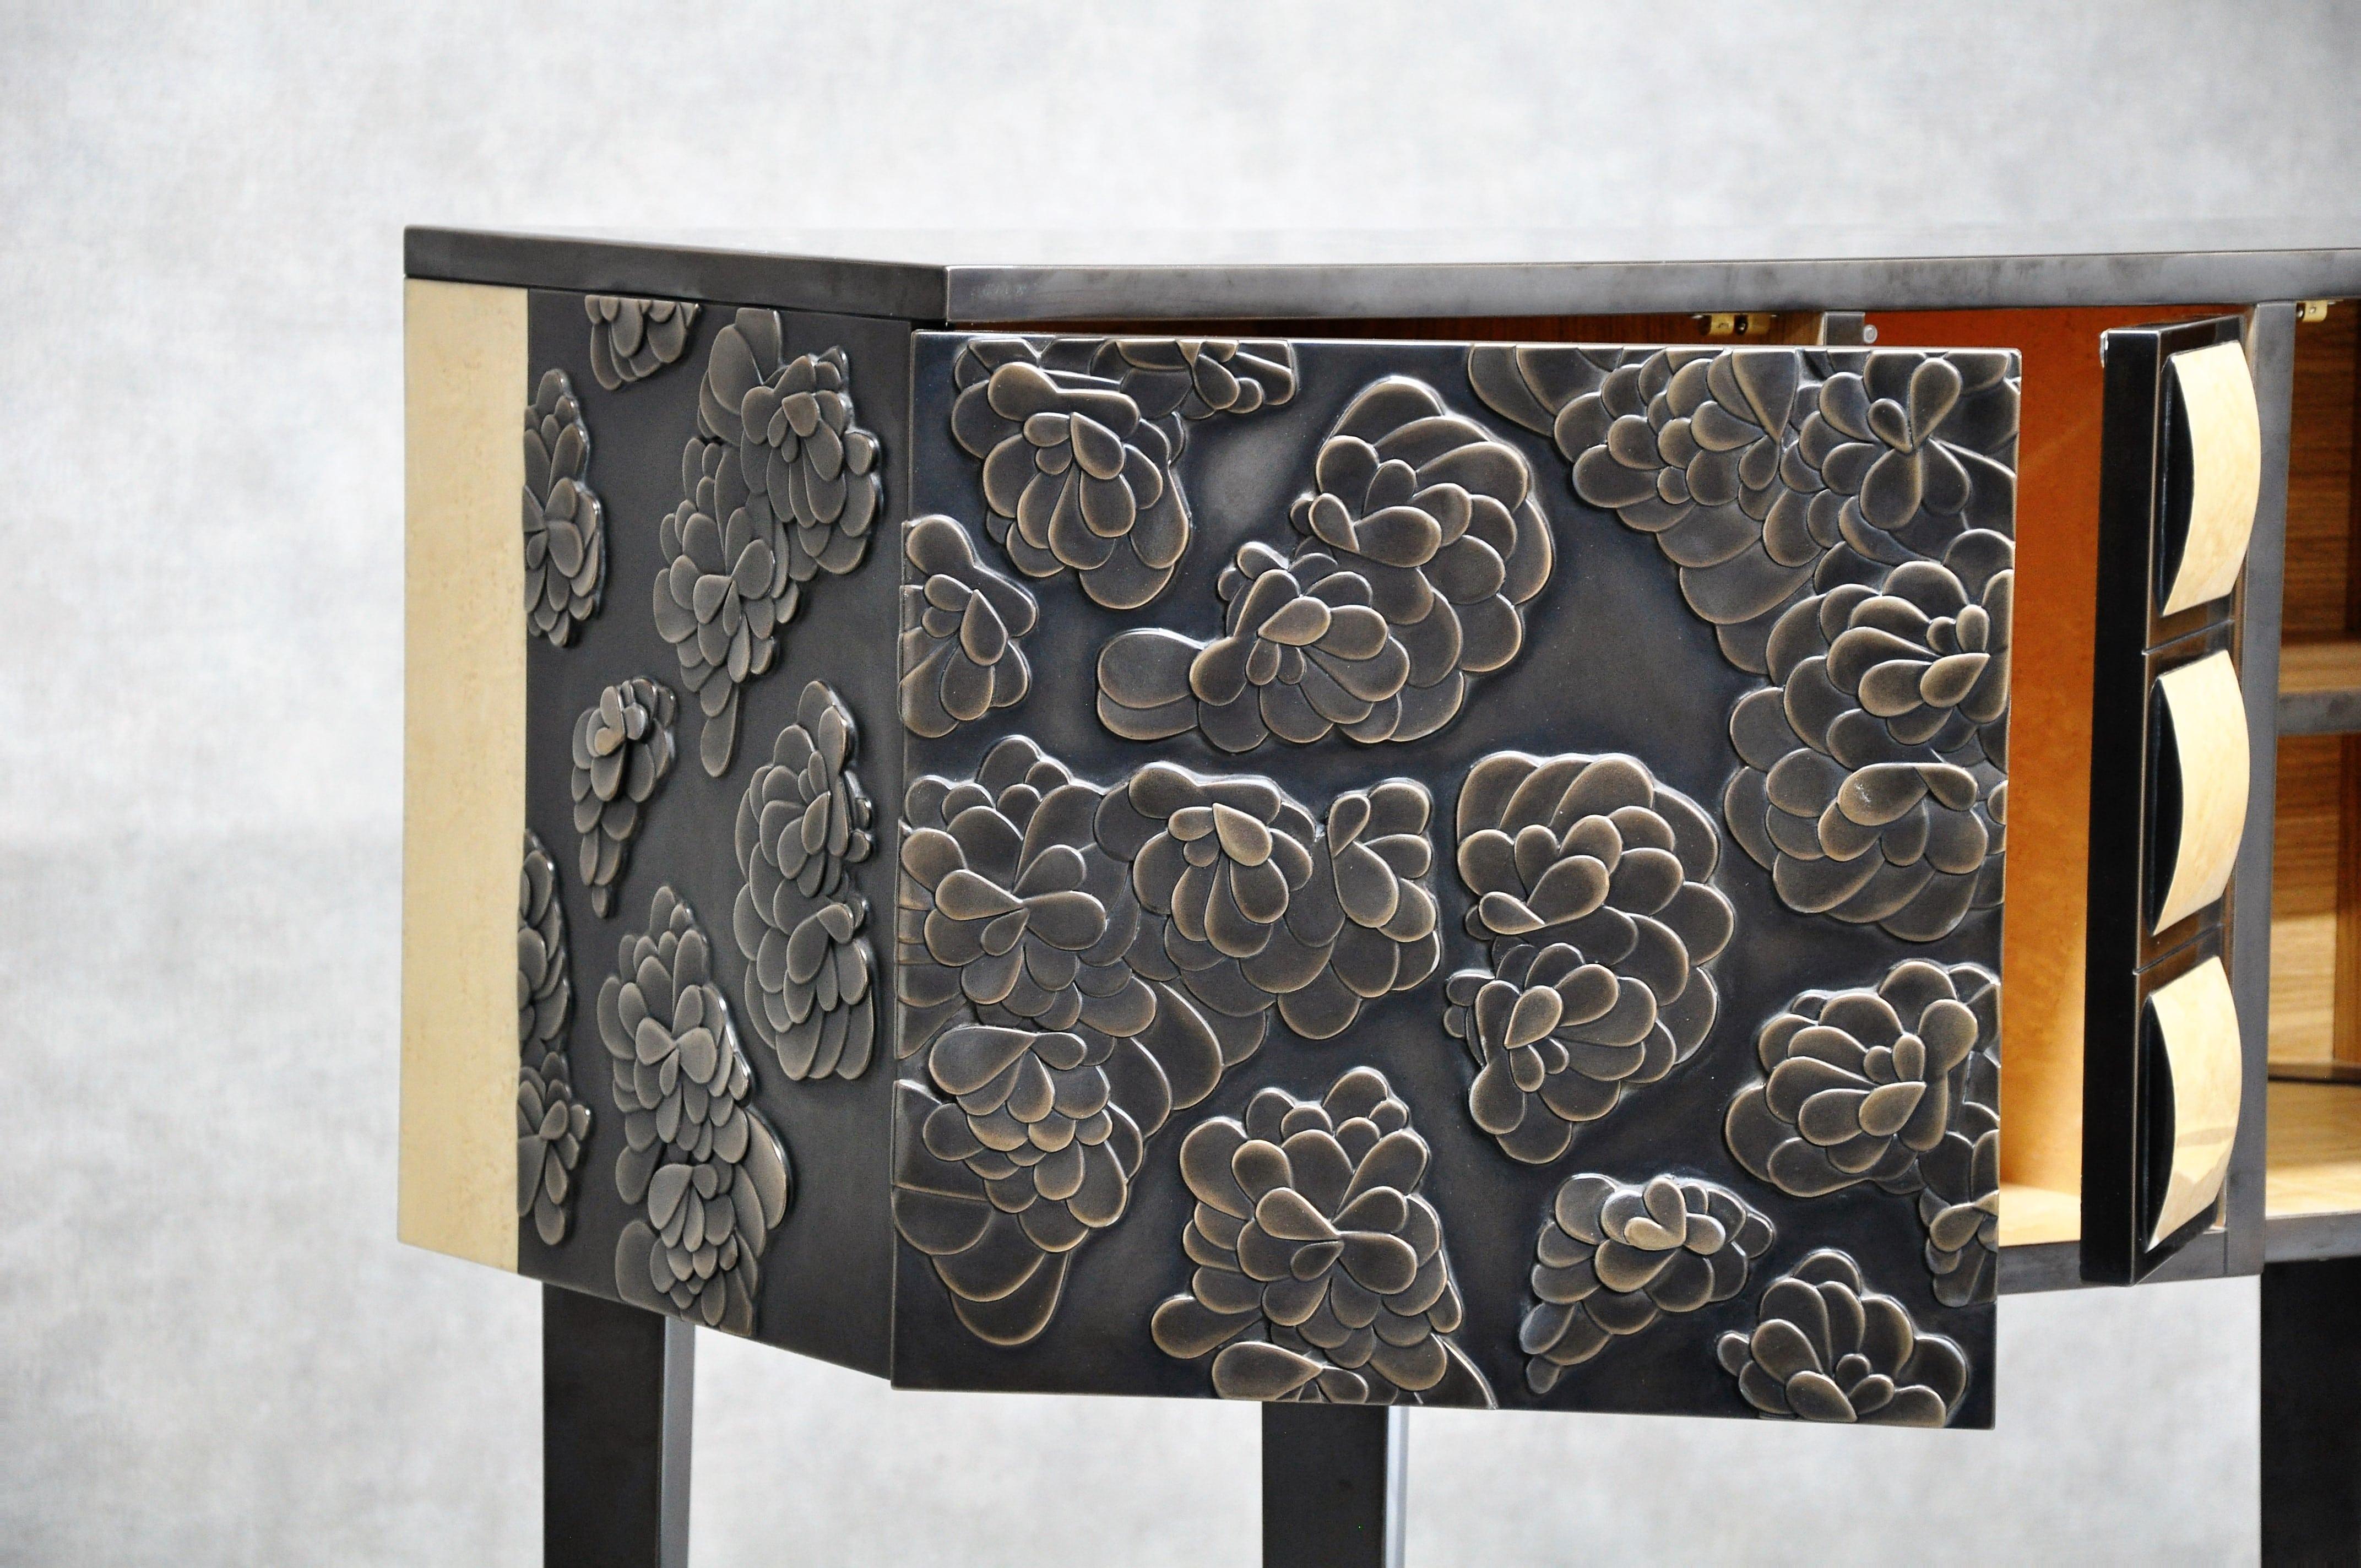 This credenza is clad entirely in thin bronze leaf. The cladding that covers the floral motifs sculpted in the wood is weathered and polished to lend depth. Two doors conceal shelved compartments. The inside of the credenza is made of solid oak and